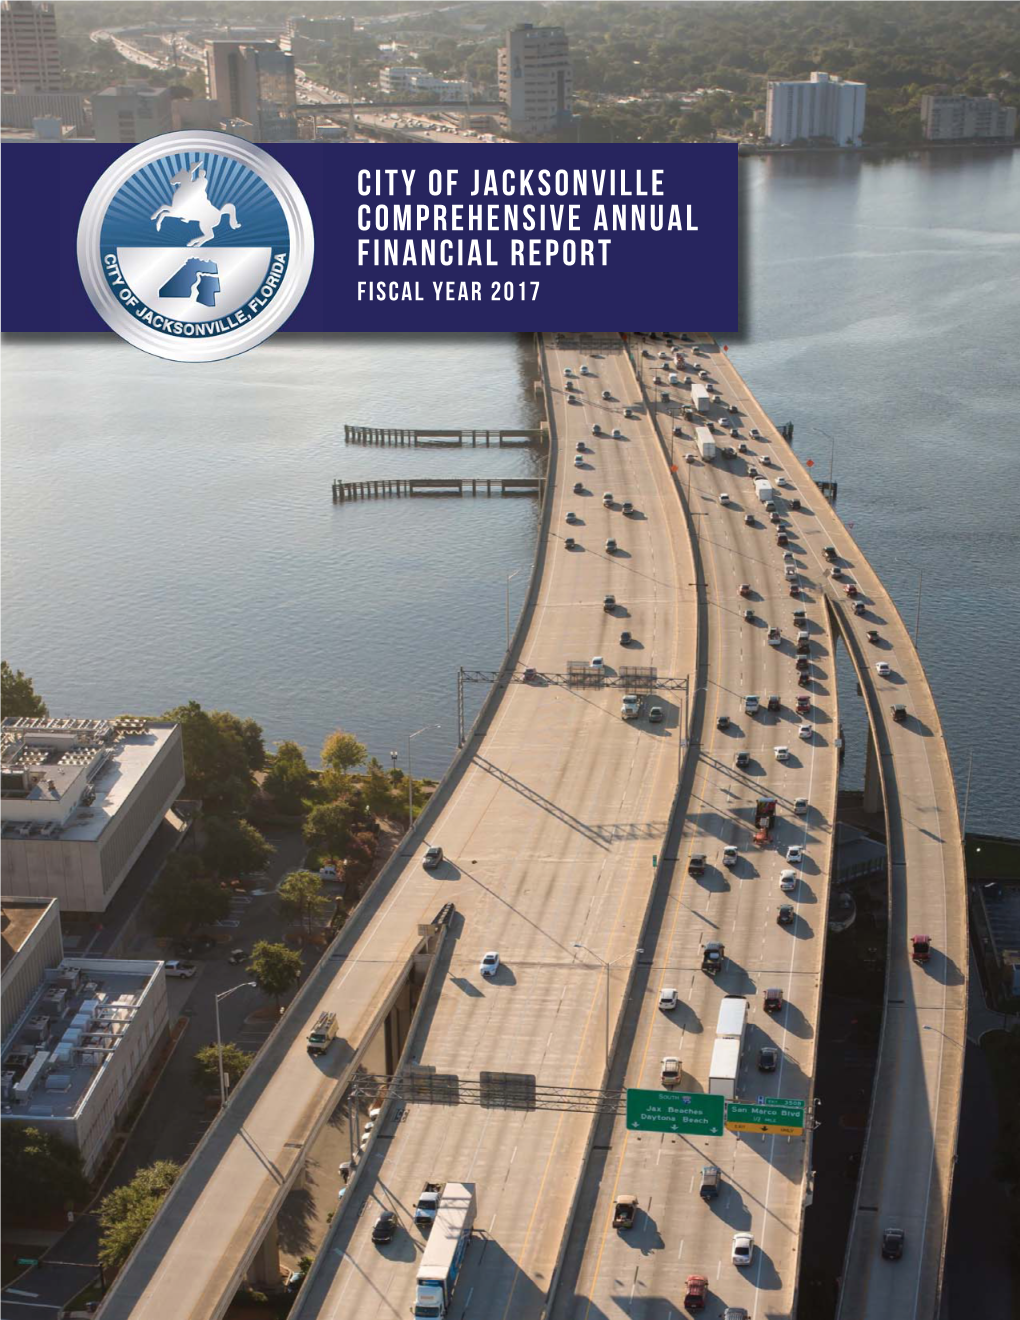 City of Jacksonville Comprehensive Annual Financial Report Fiscal Year 2017